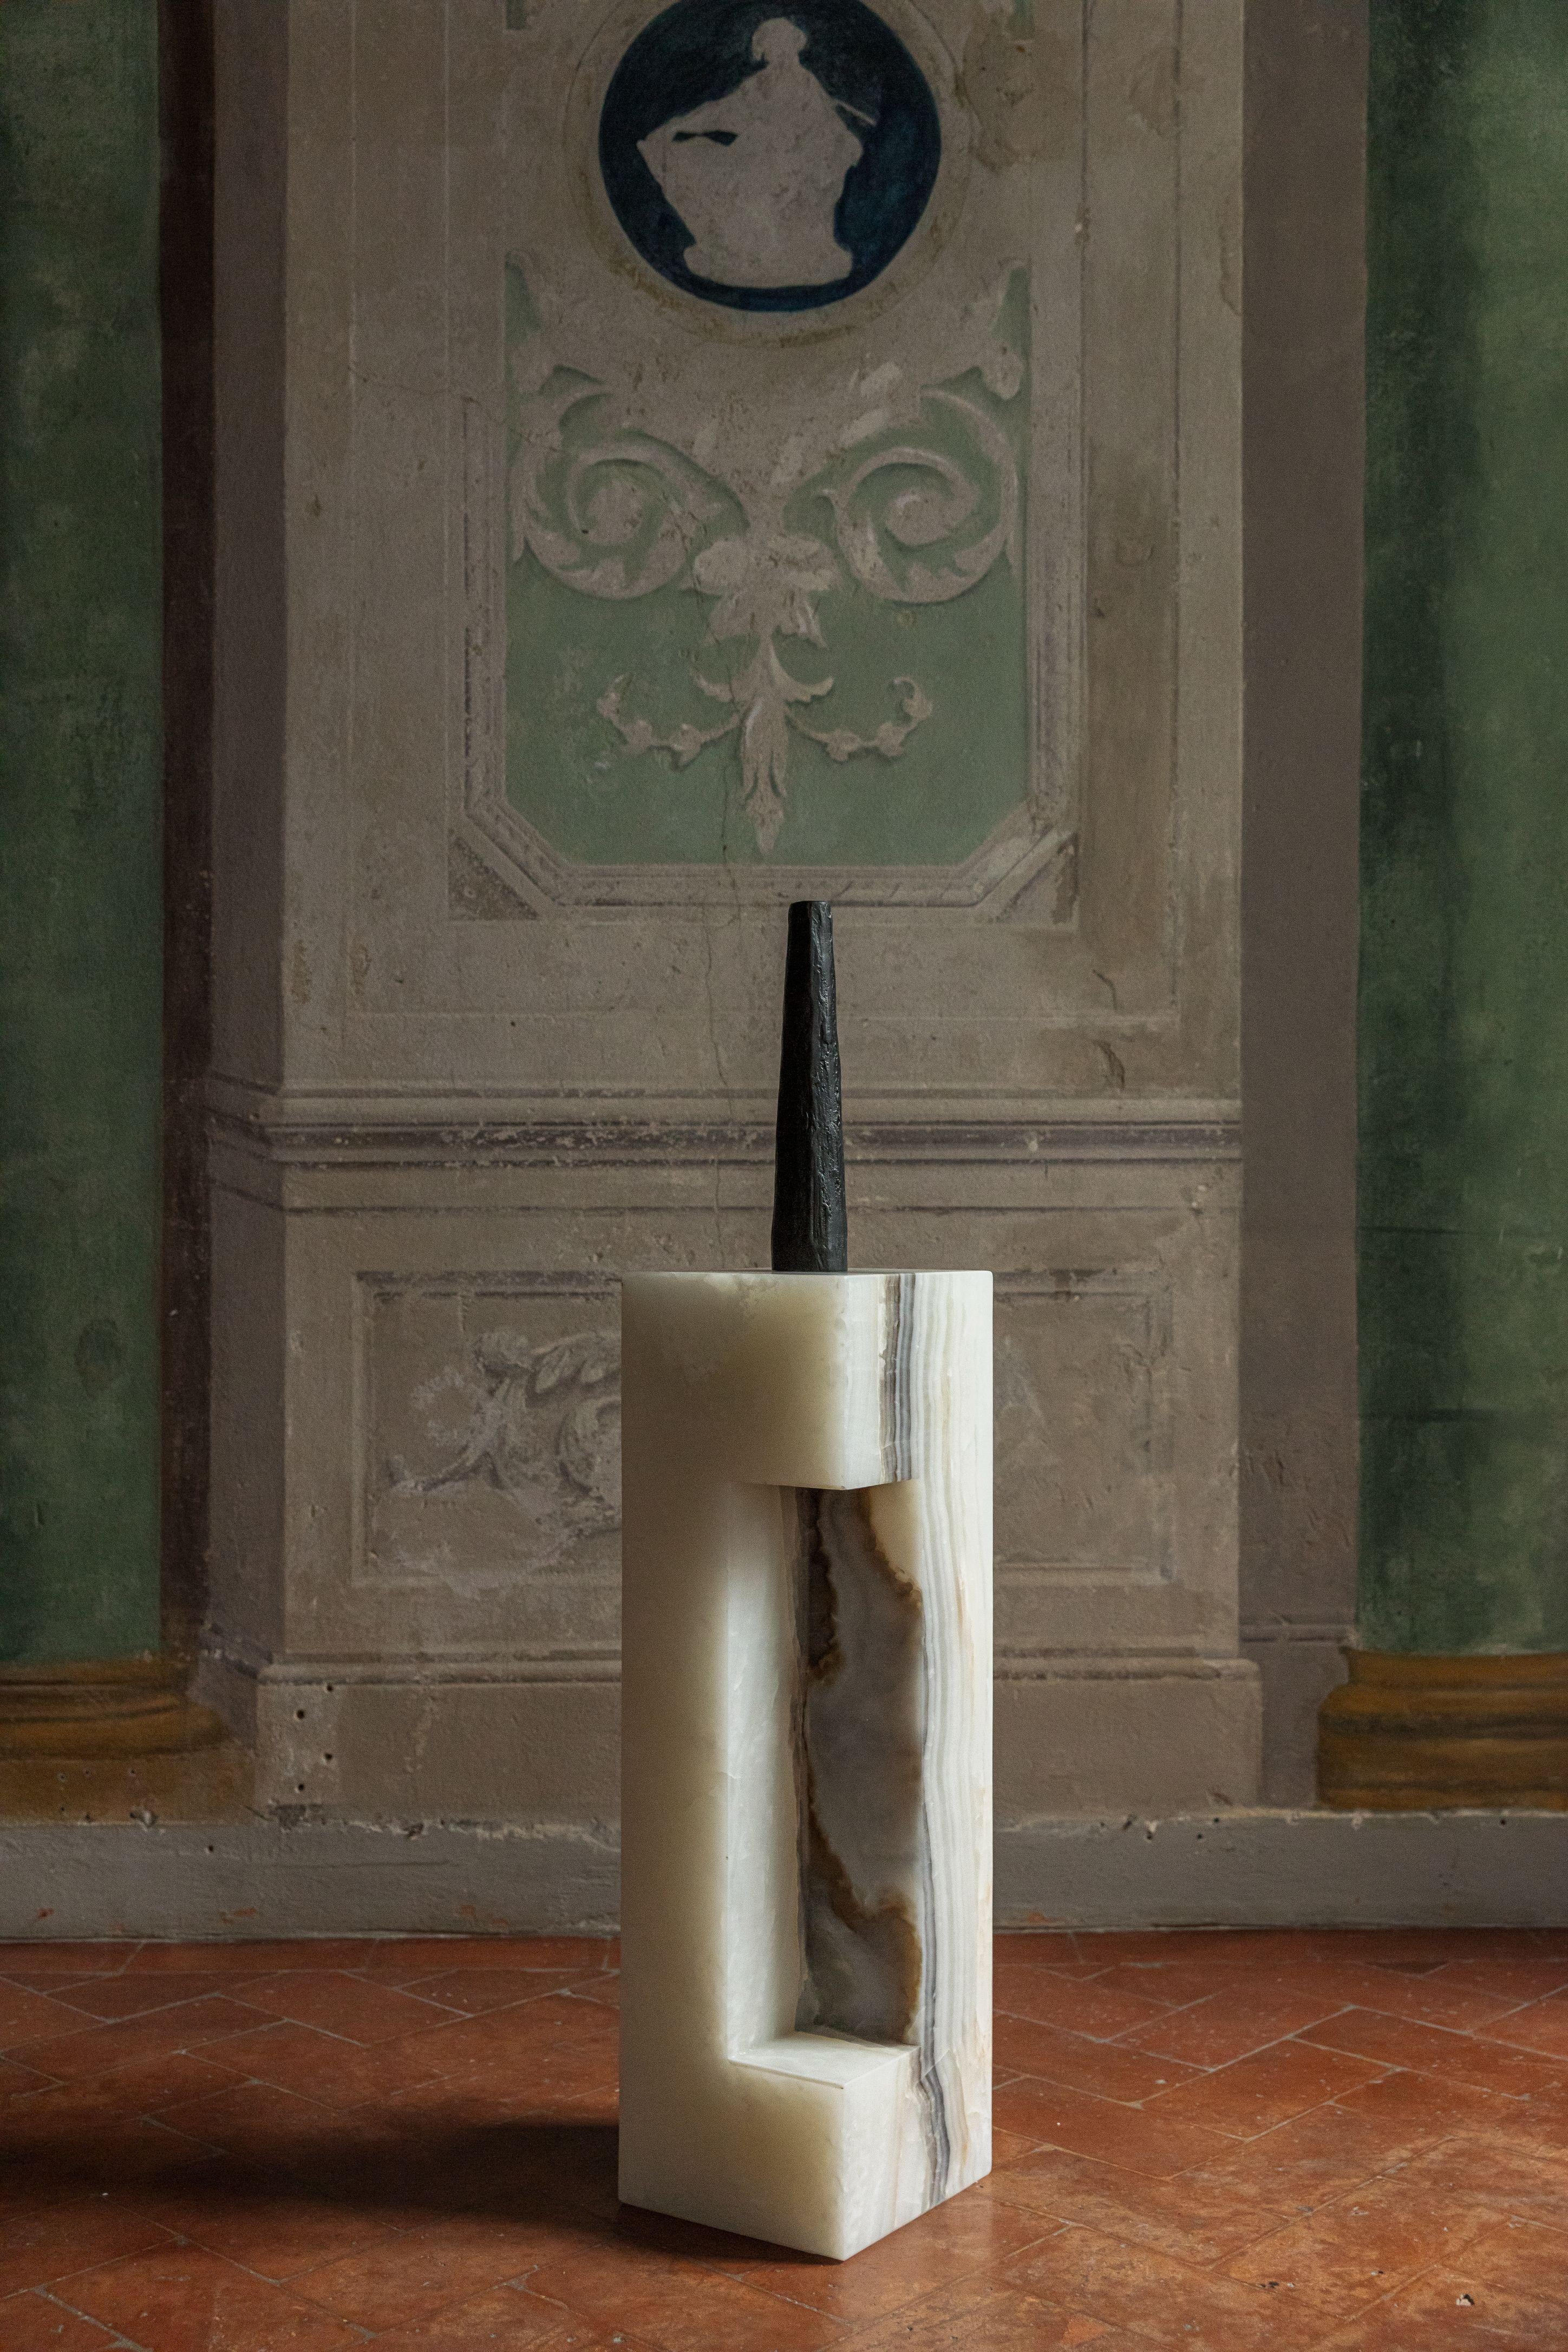 Grande candle pillar by Rick Owens
2015
Dimensions: L 7.5 x W 7.5 x H 41 cm
Materials: Bronze
Weight: 3.4 kg

Available in Black finish or Nitrate (Dark Brown) finish, please contact us.

Rick Owens is a California-born fashion and furniture